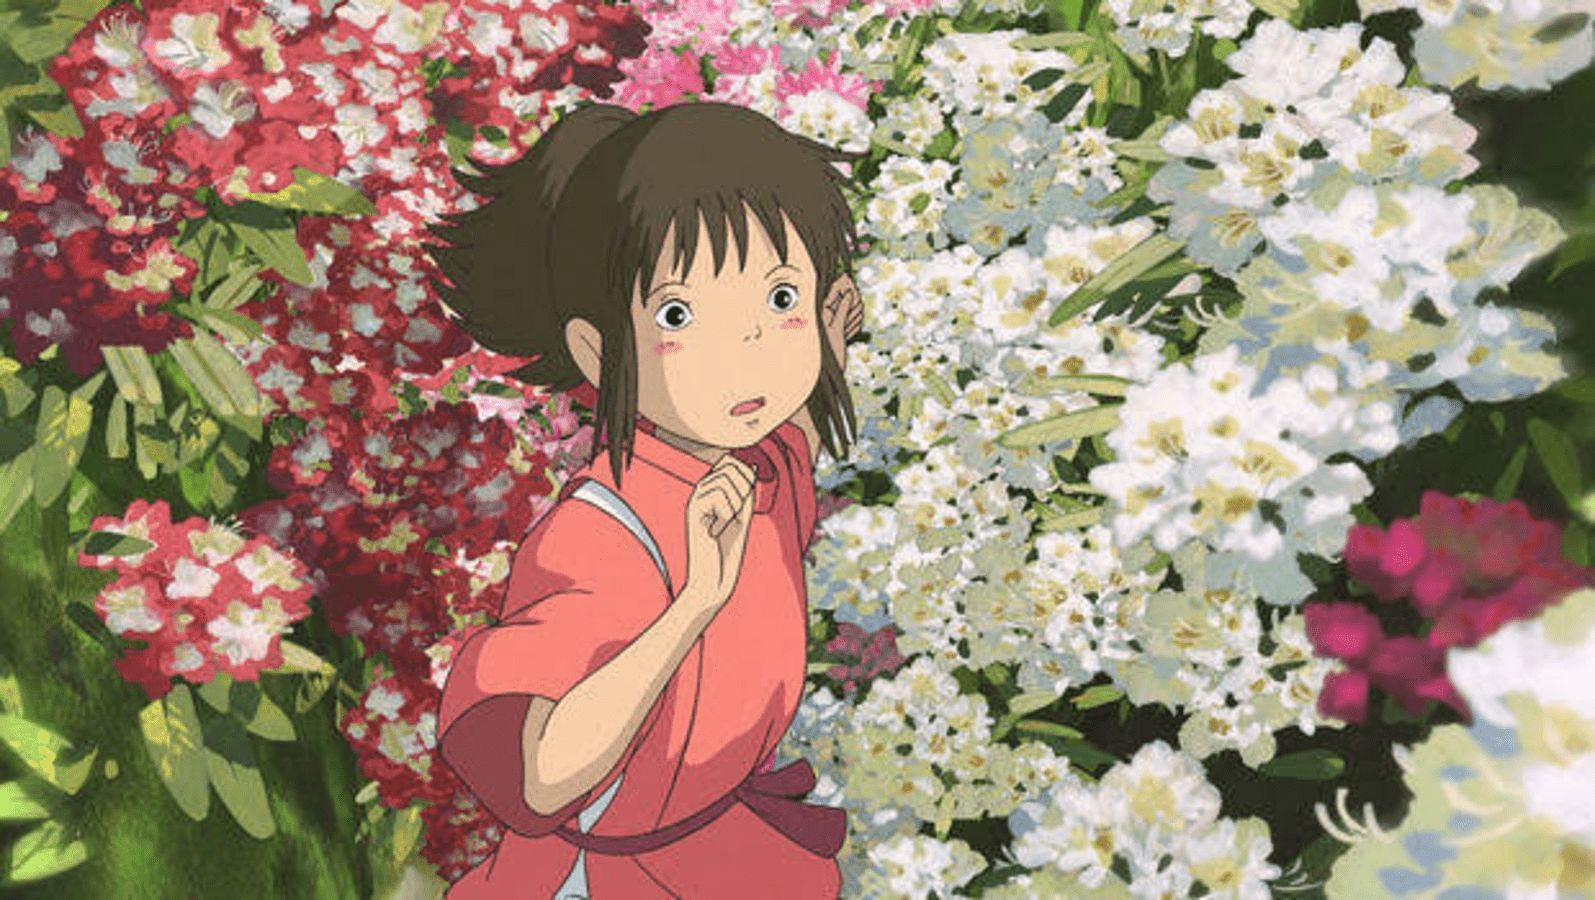 Chihiro Ogino is one of the most popular and beloved anime characters named Chihiro (Image via Studio Ghibli)